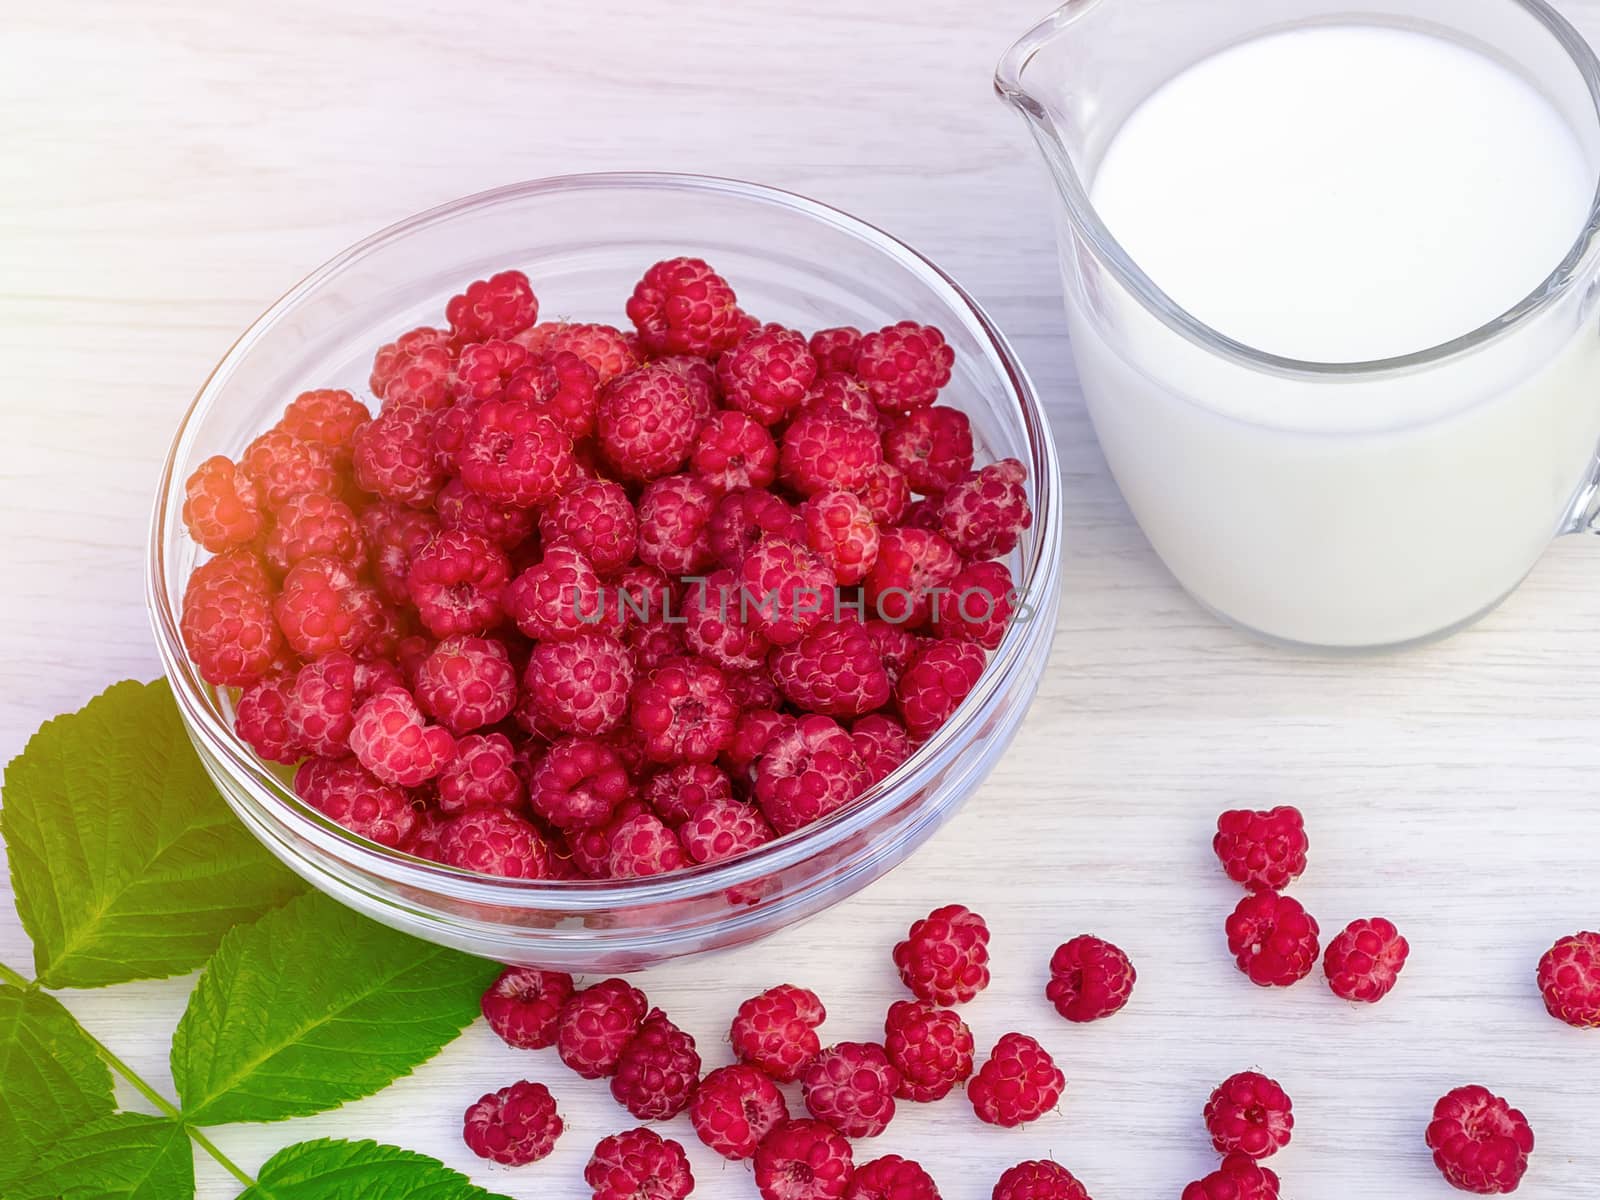 Fresh raspberries in a glass bowl and natural iogurt on a white wooden table. Healthy eating concept by galsand